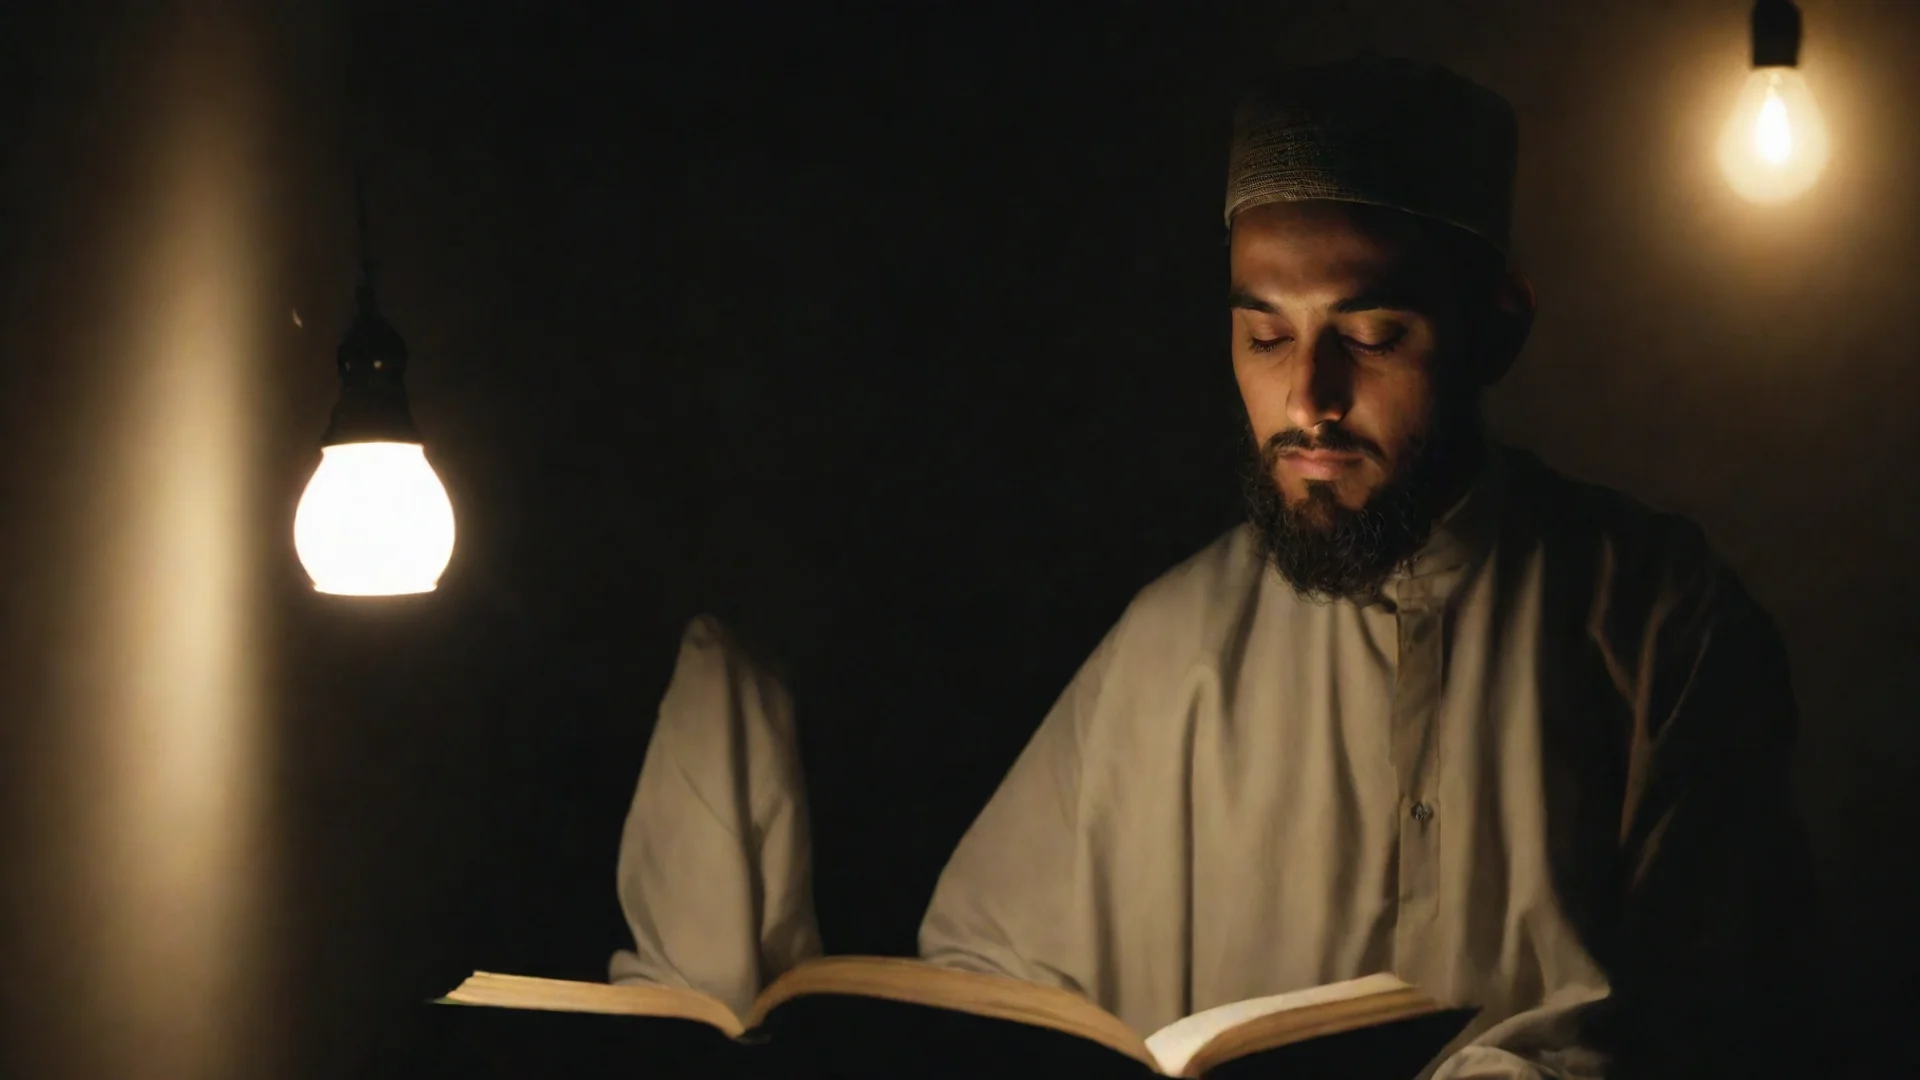 amazing a muslim man reading a book in a dark room with lamp light. awesome portrait 2 wide